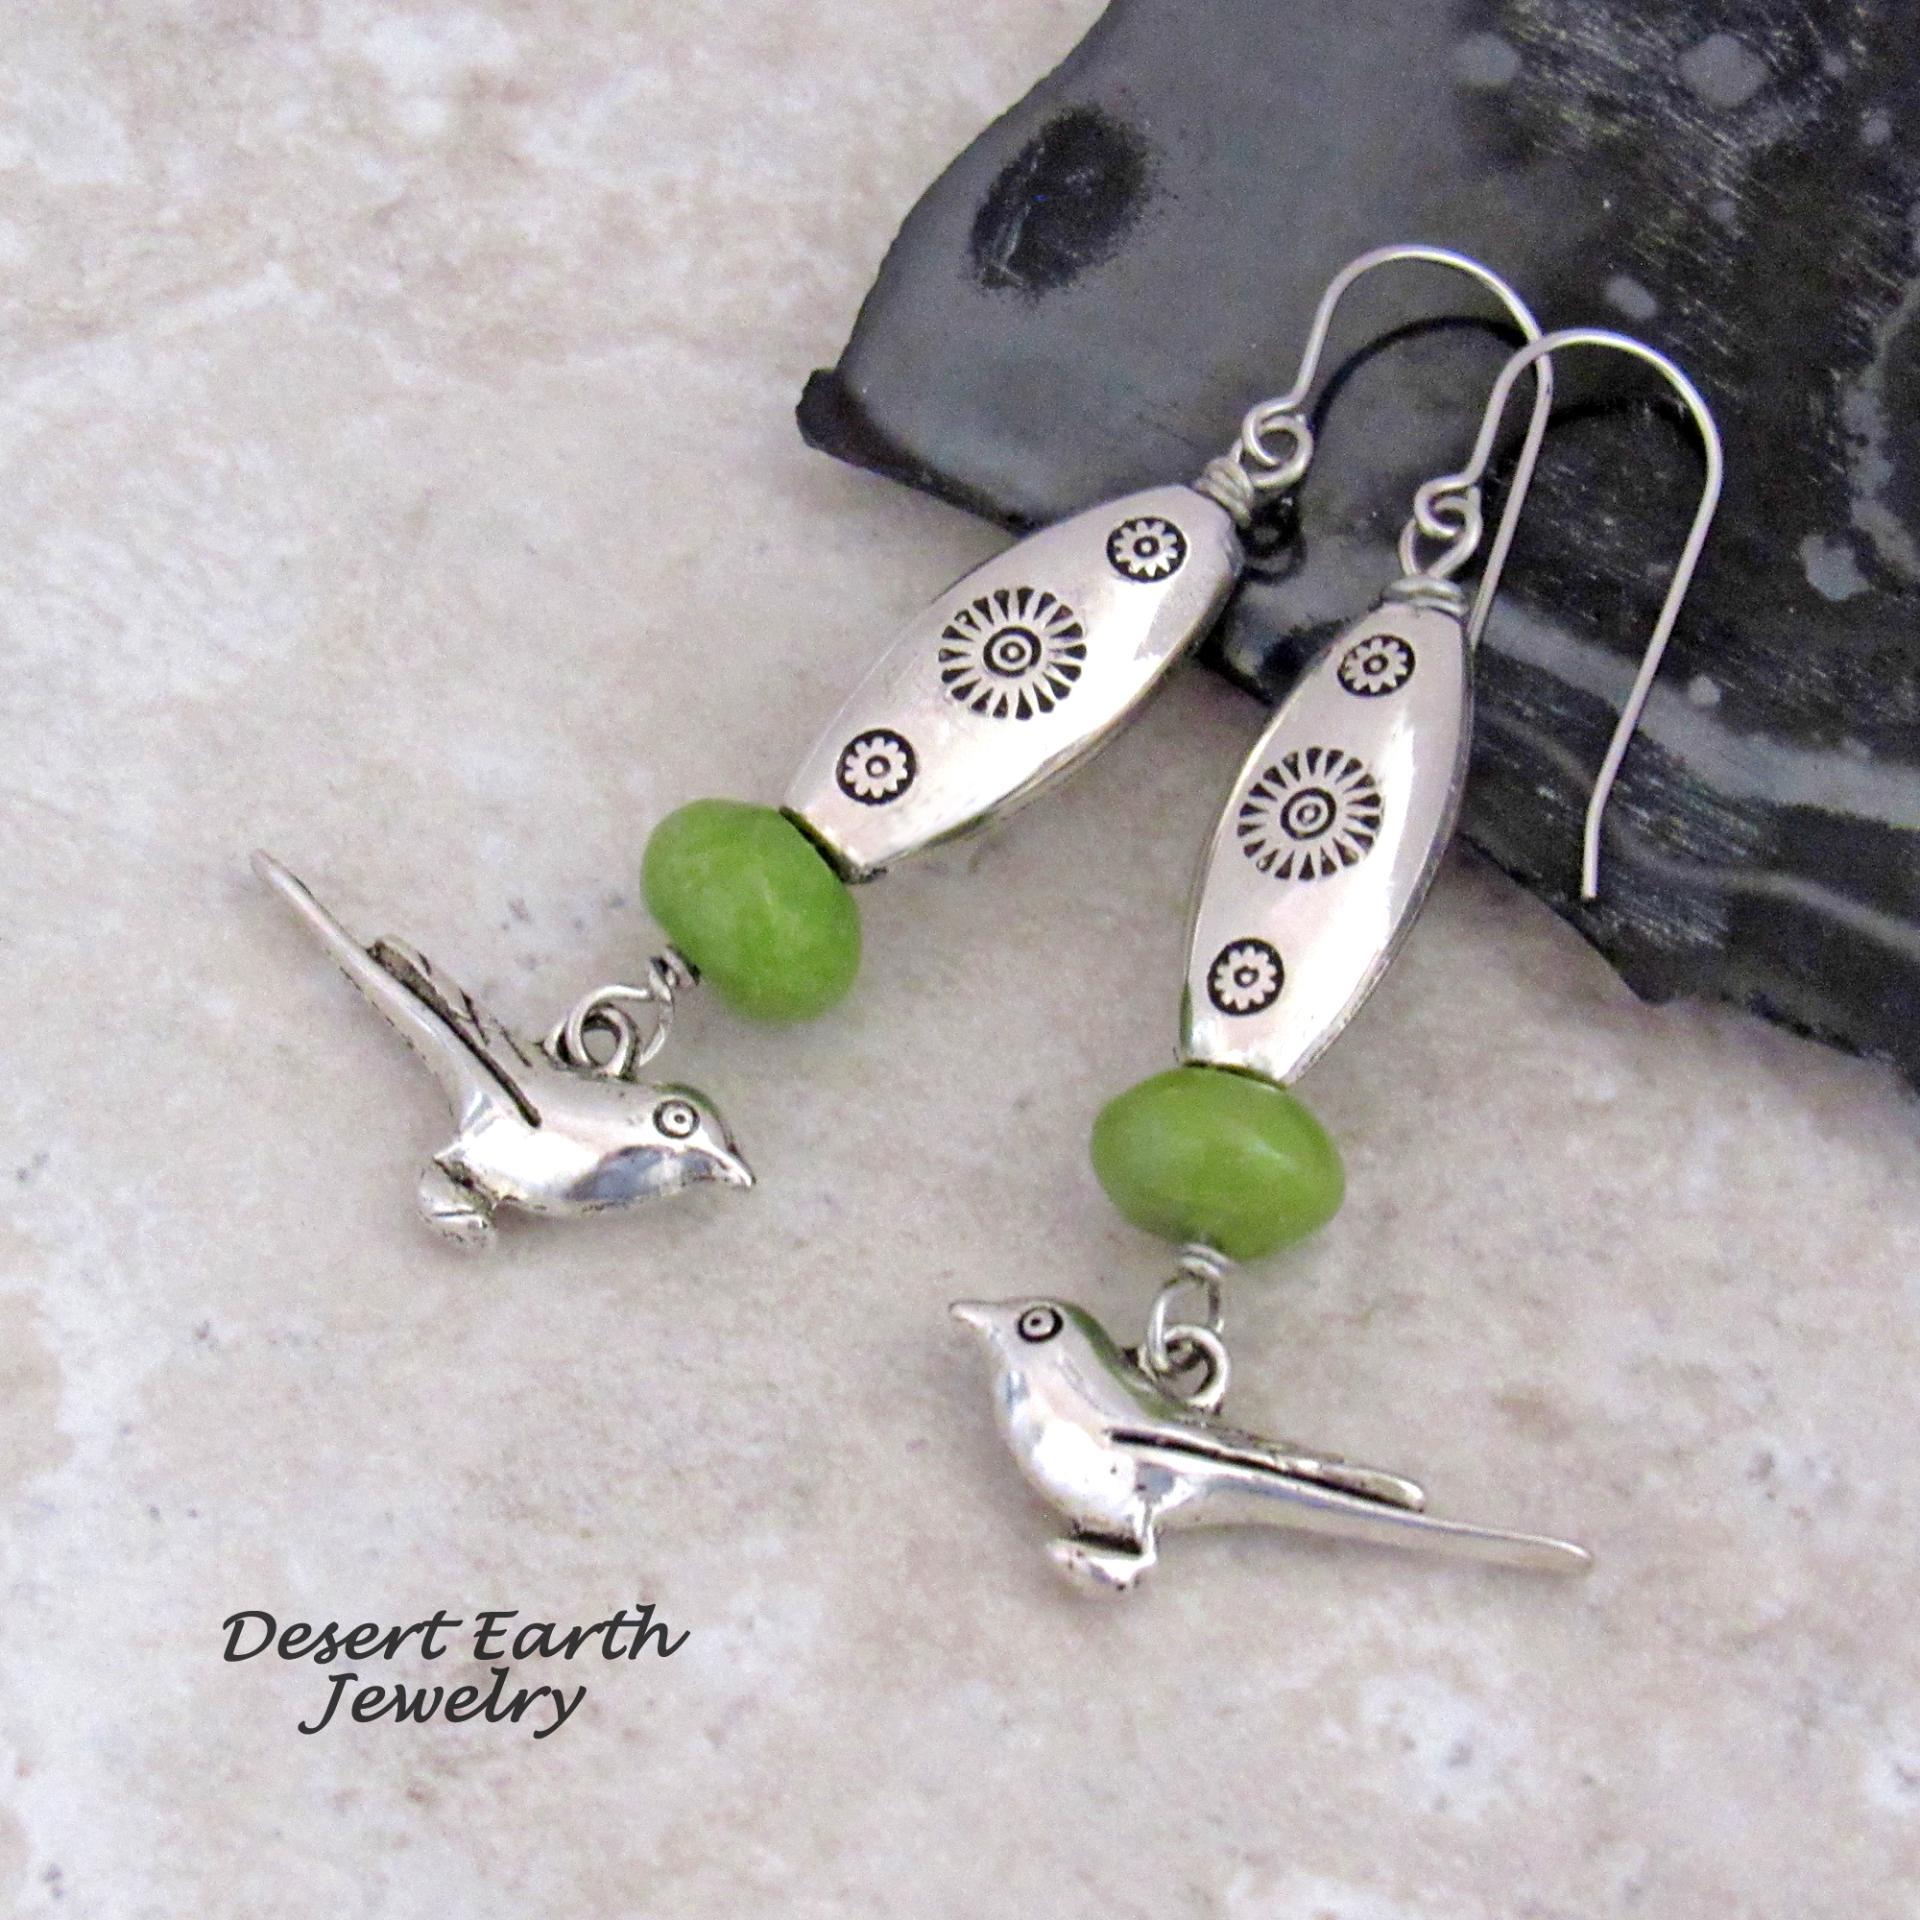 Pewter Bird Dangle Earrings with Green Serpentine Gemstones and Silver Tone Beads - Unique Jewelry Gifts for Nature and Bird Lovers